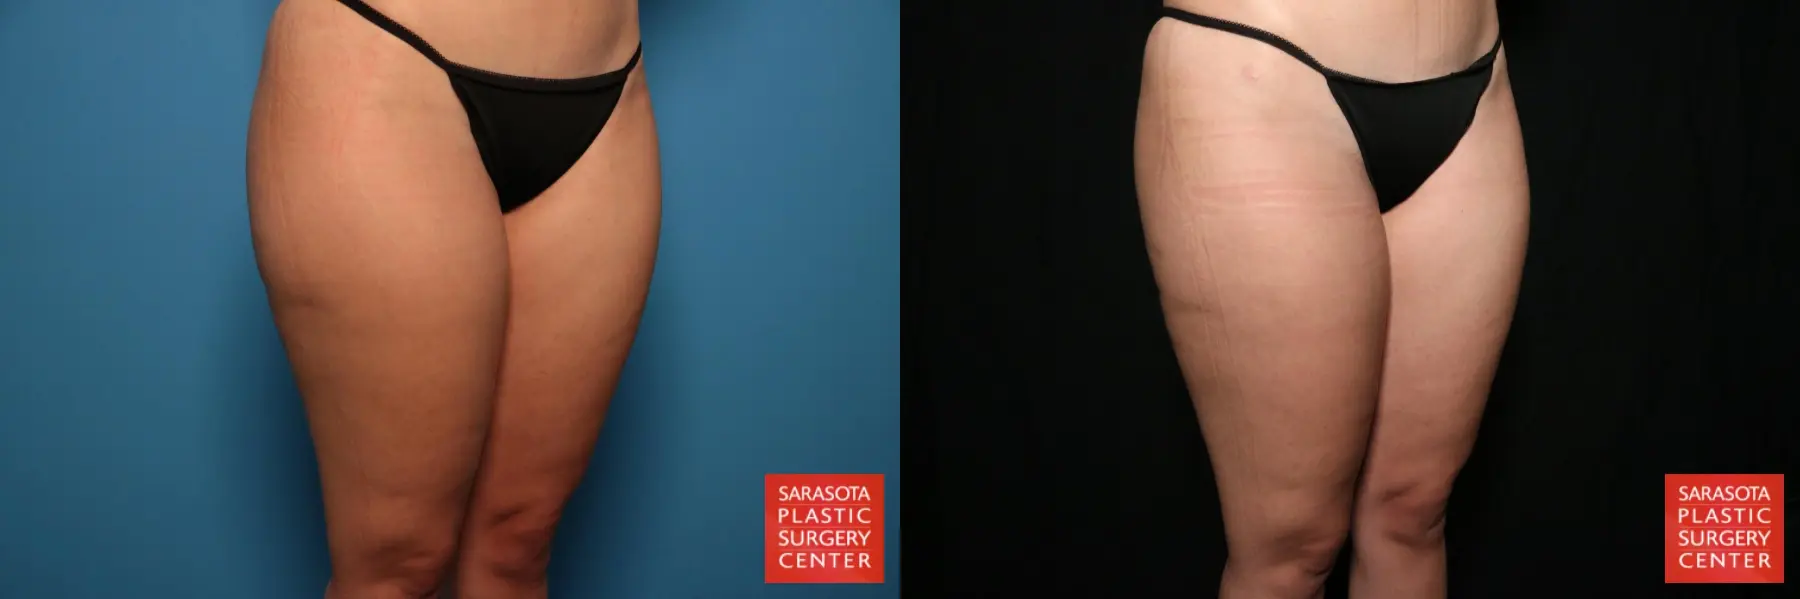 Liposuction: Patient 1 - Before and After 3